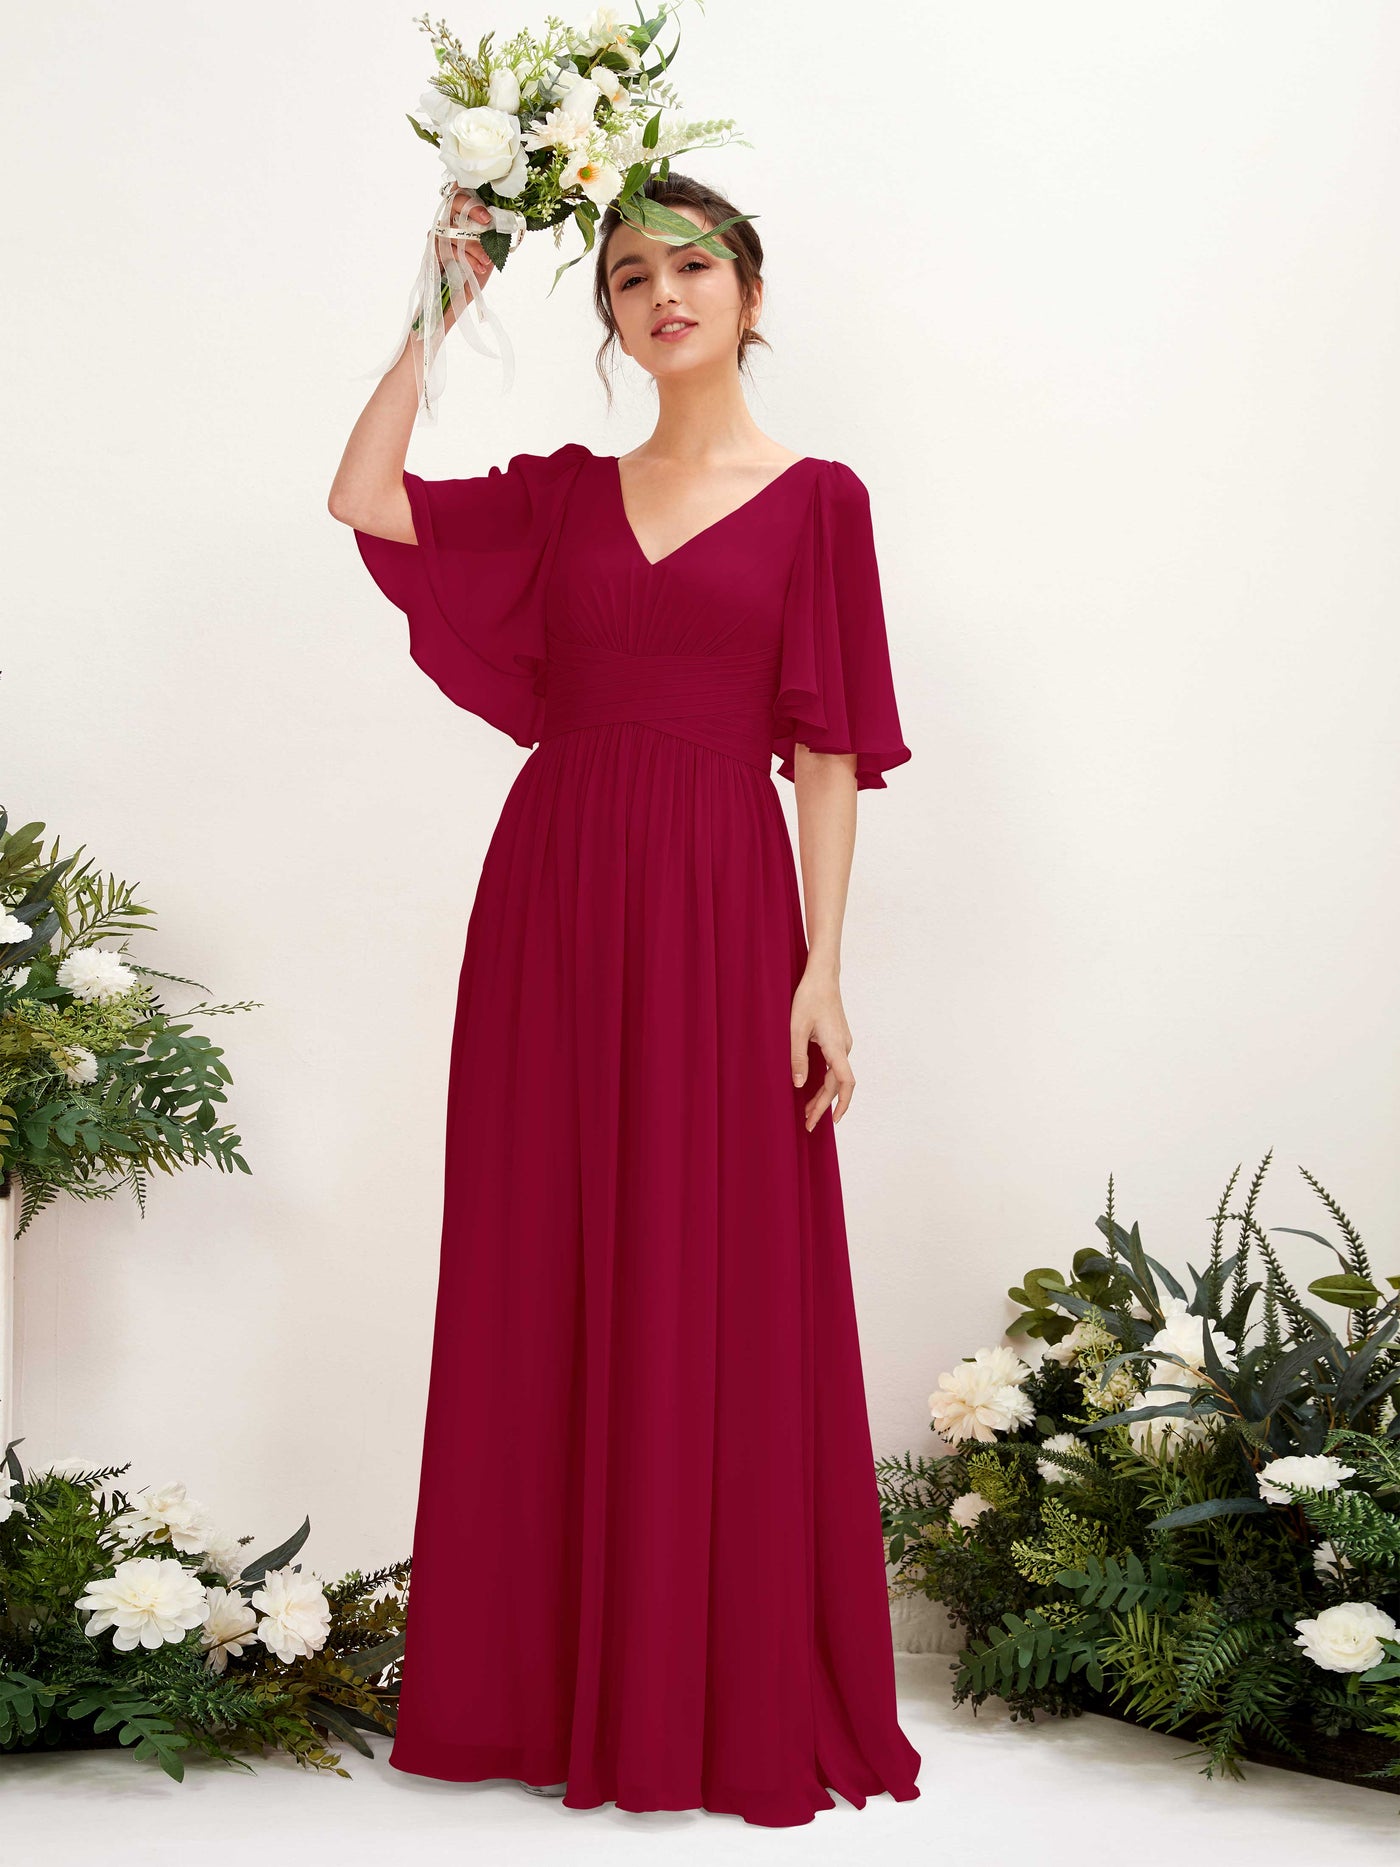 Jester Red Bridesmaid Dresses Bridesmaid Dress A-line Chiffon V-neck Full Length 1/2 Sleeves Wedding Party Dress (81221641)#color_jester-red